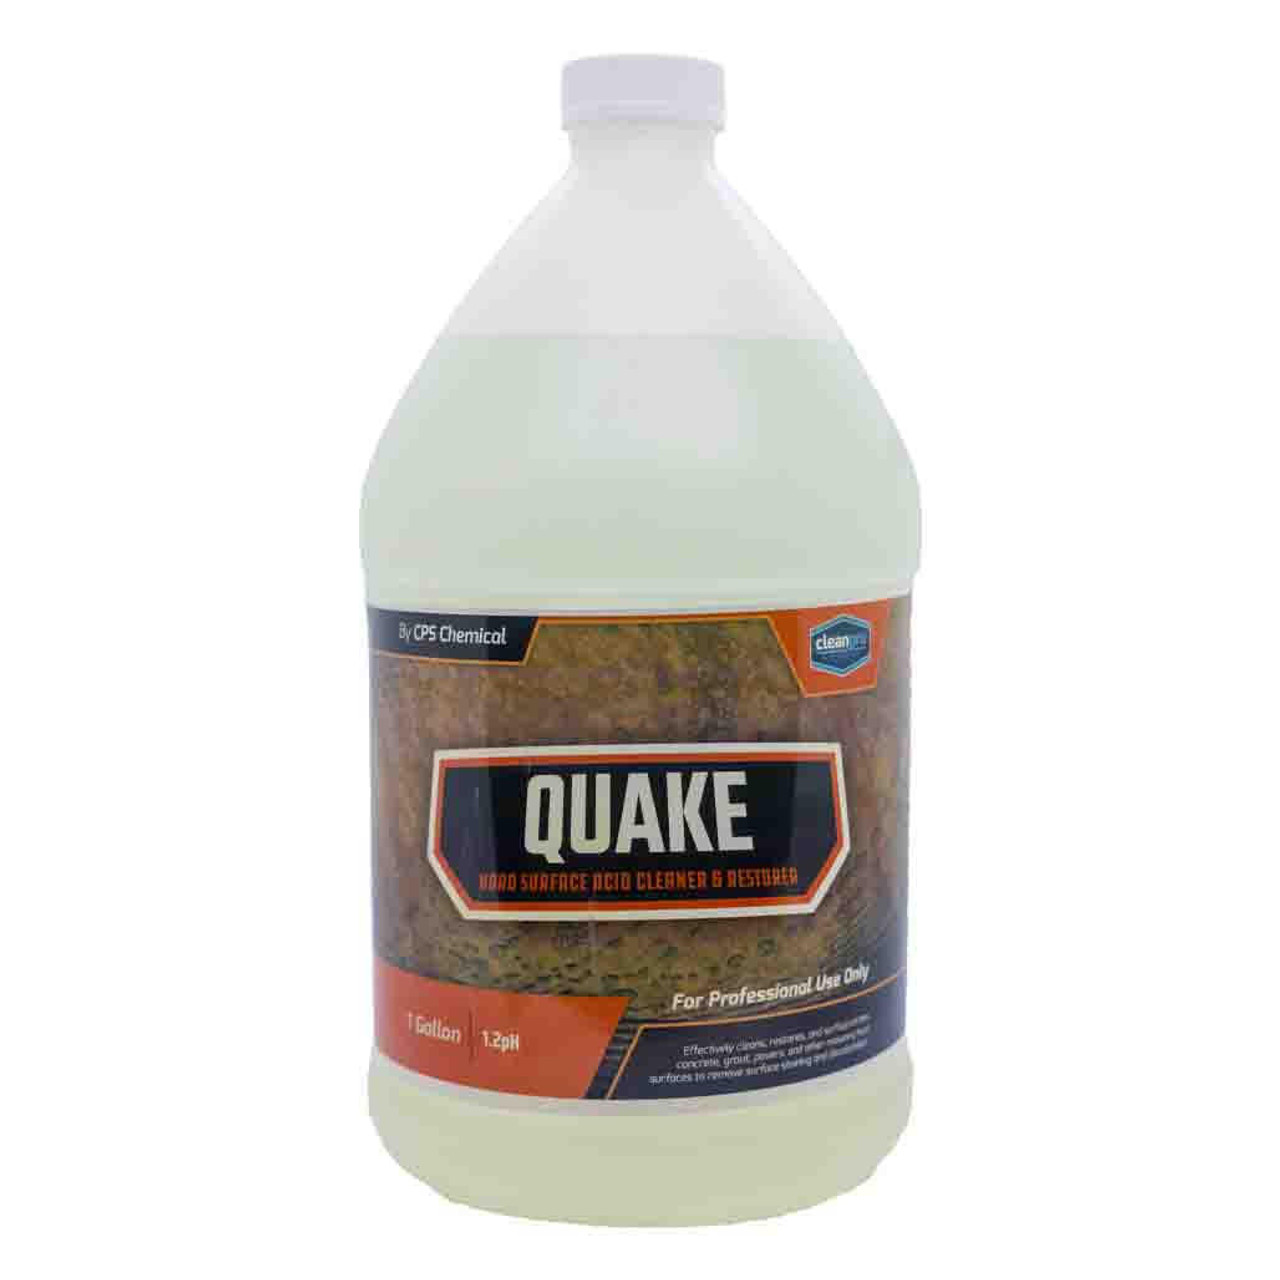 CleanPro Chemical CPS Quake Hard Surface Acid Cleaner and Restorer Concentrate Gallon